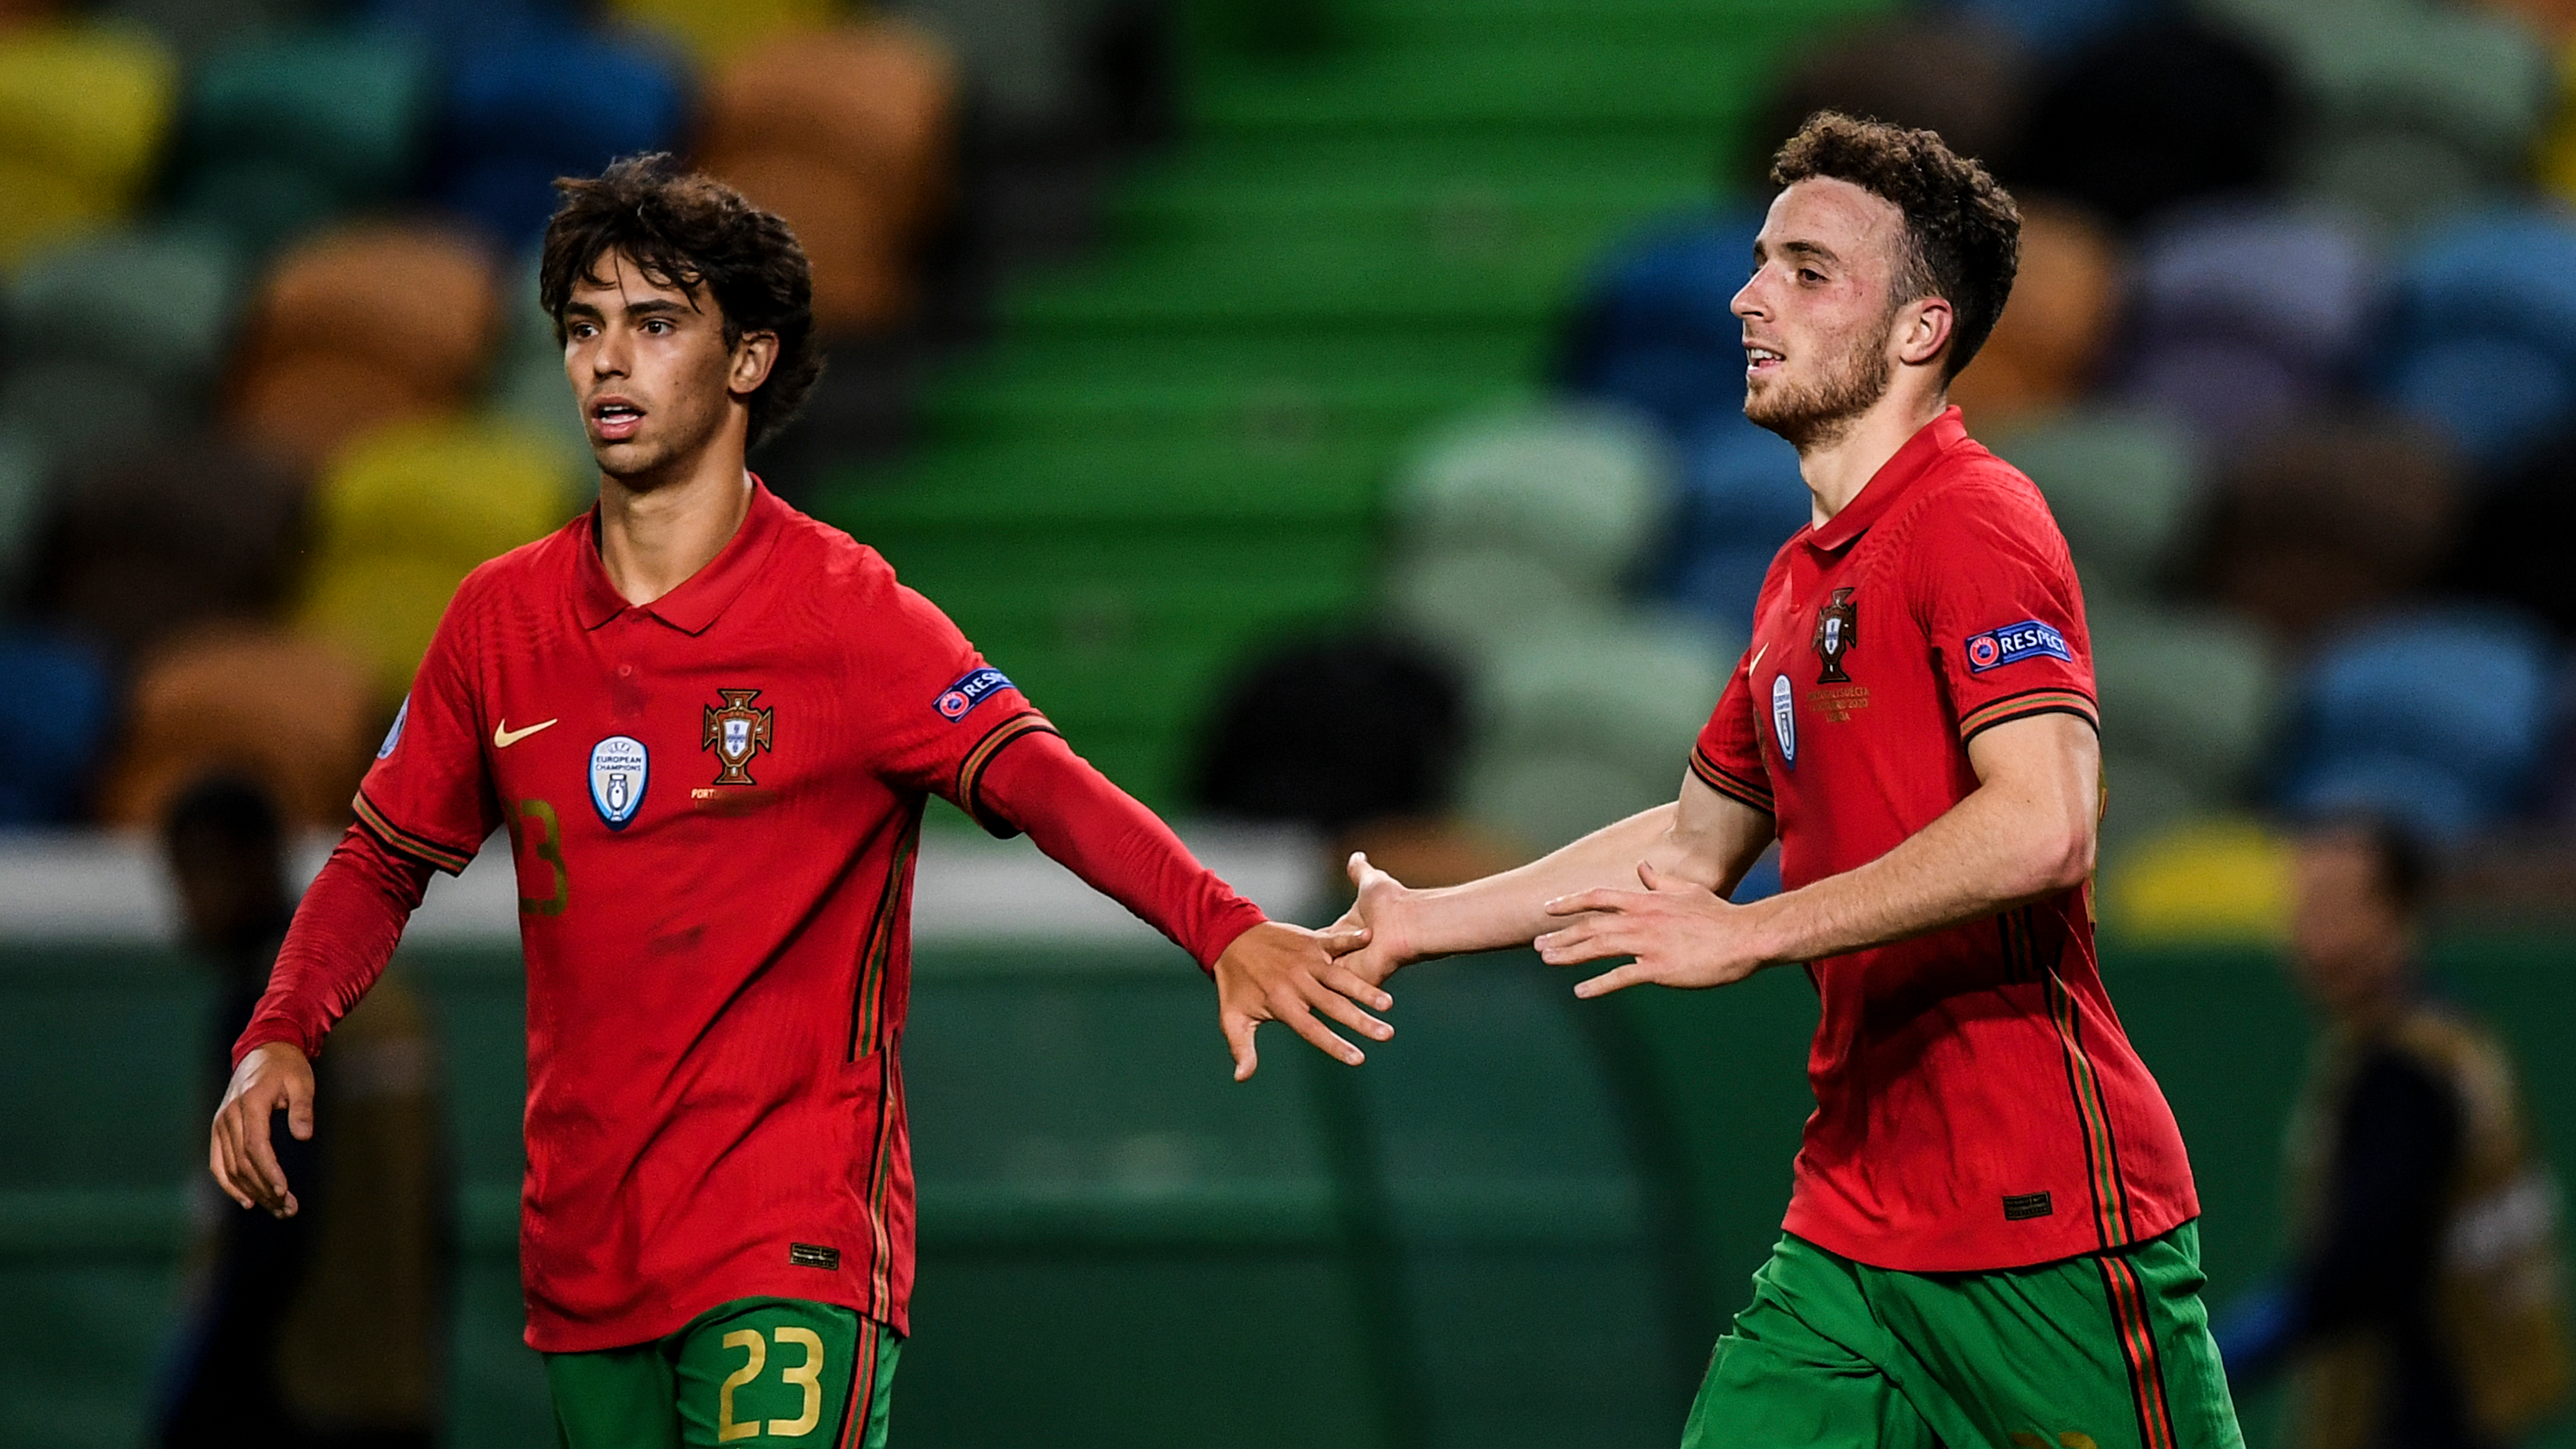 There was no pressure to replace Ronaldo for Portugal - Jota